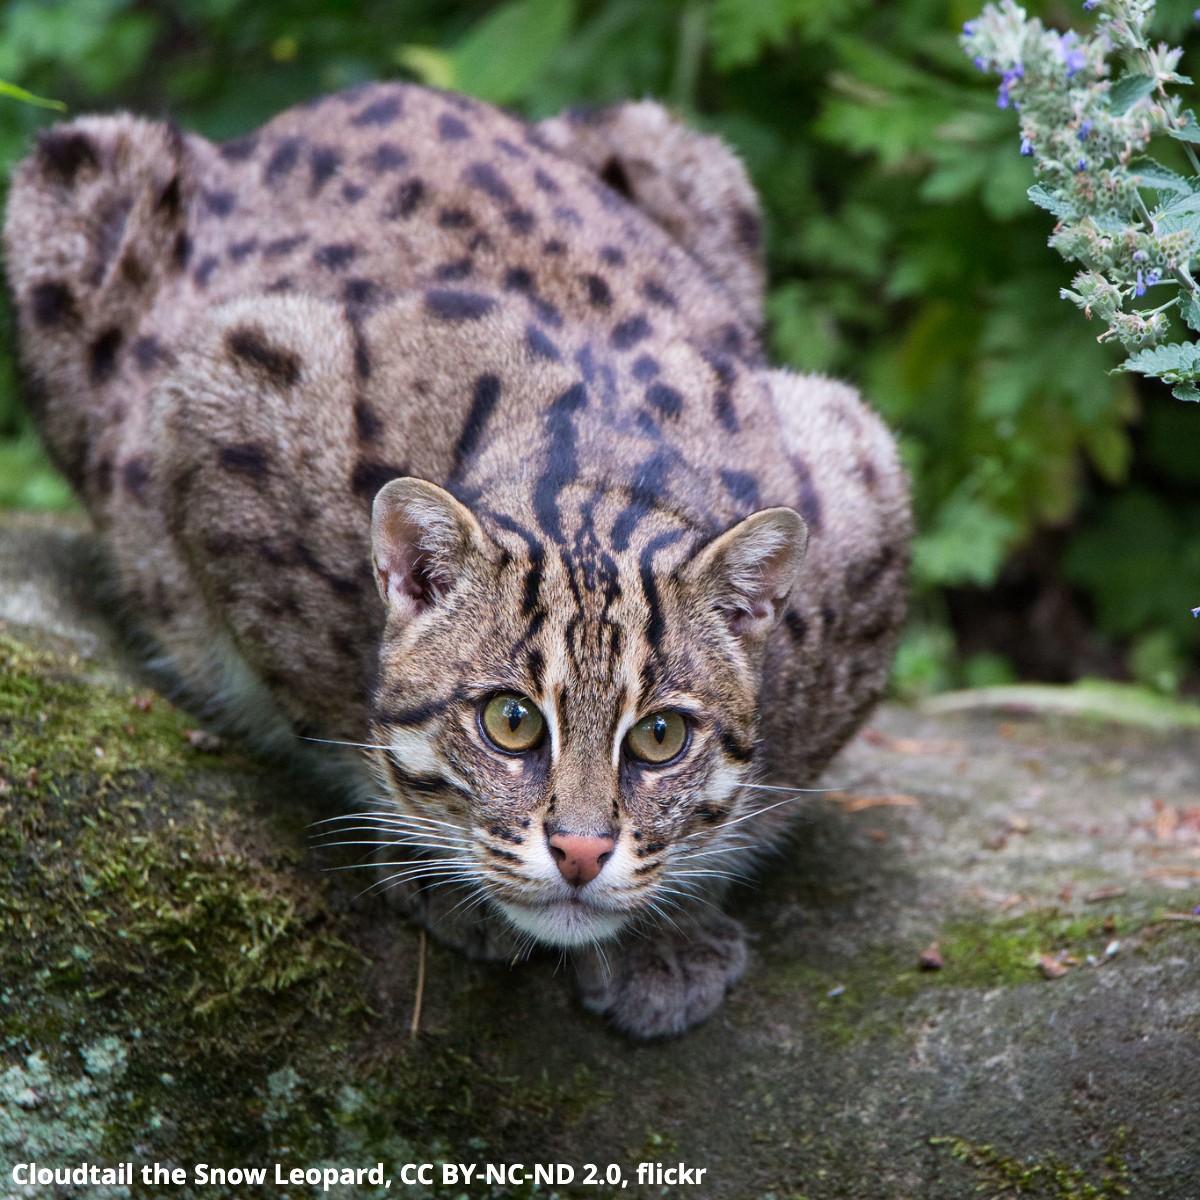 Happy Caturday! Meet the fishing cat. Found in parts of Southeast Asia, this critter prefers to inhabit areas near bodies of water, like mangroves, marshes, & swamps. It's a specialized fish-hunter, sometimes dunking its head below the surface to catch food in its mouth.